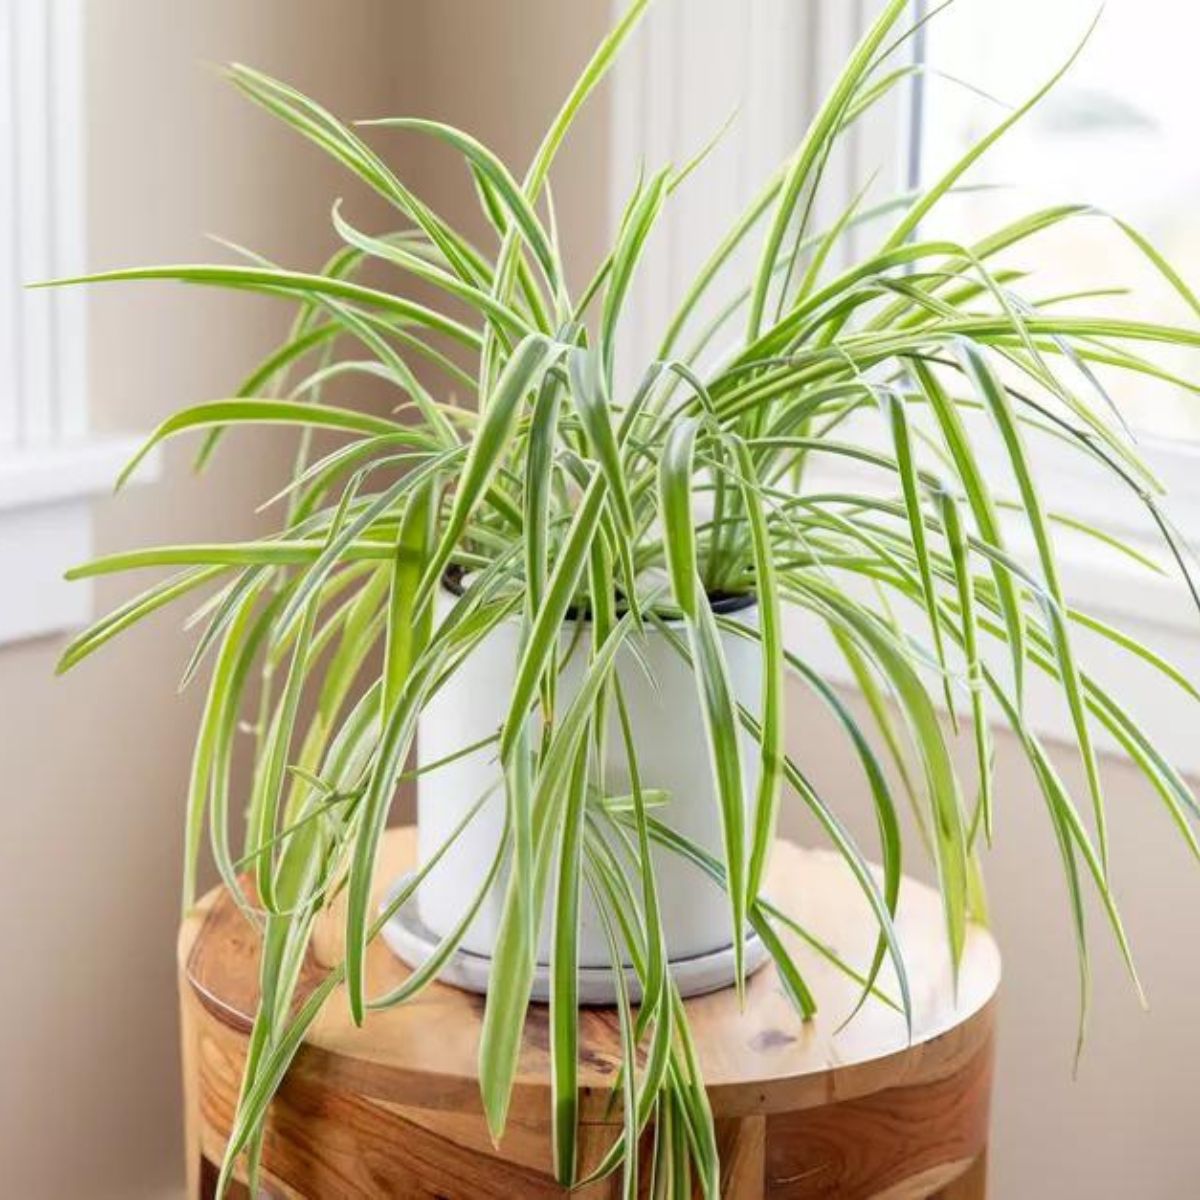 5-houseplants-for-beginners-thatll-help-you-start-your-plant-journey-right-away-featured